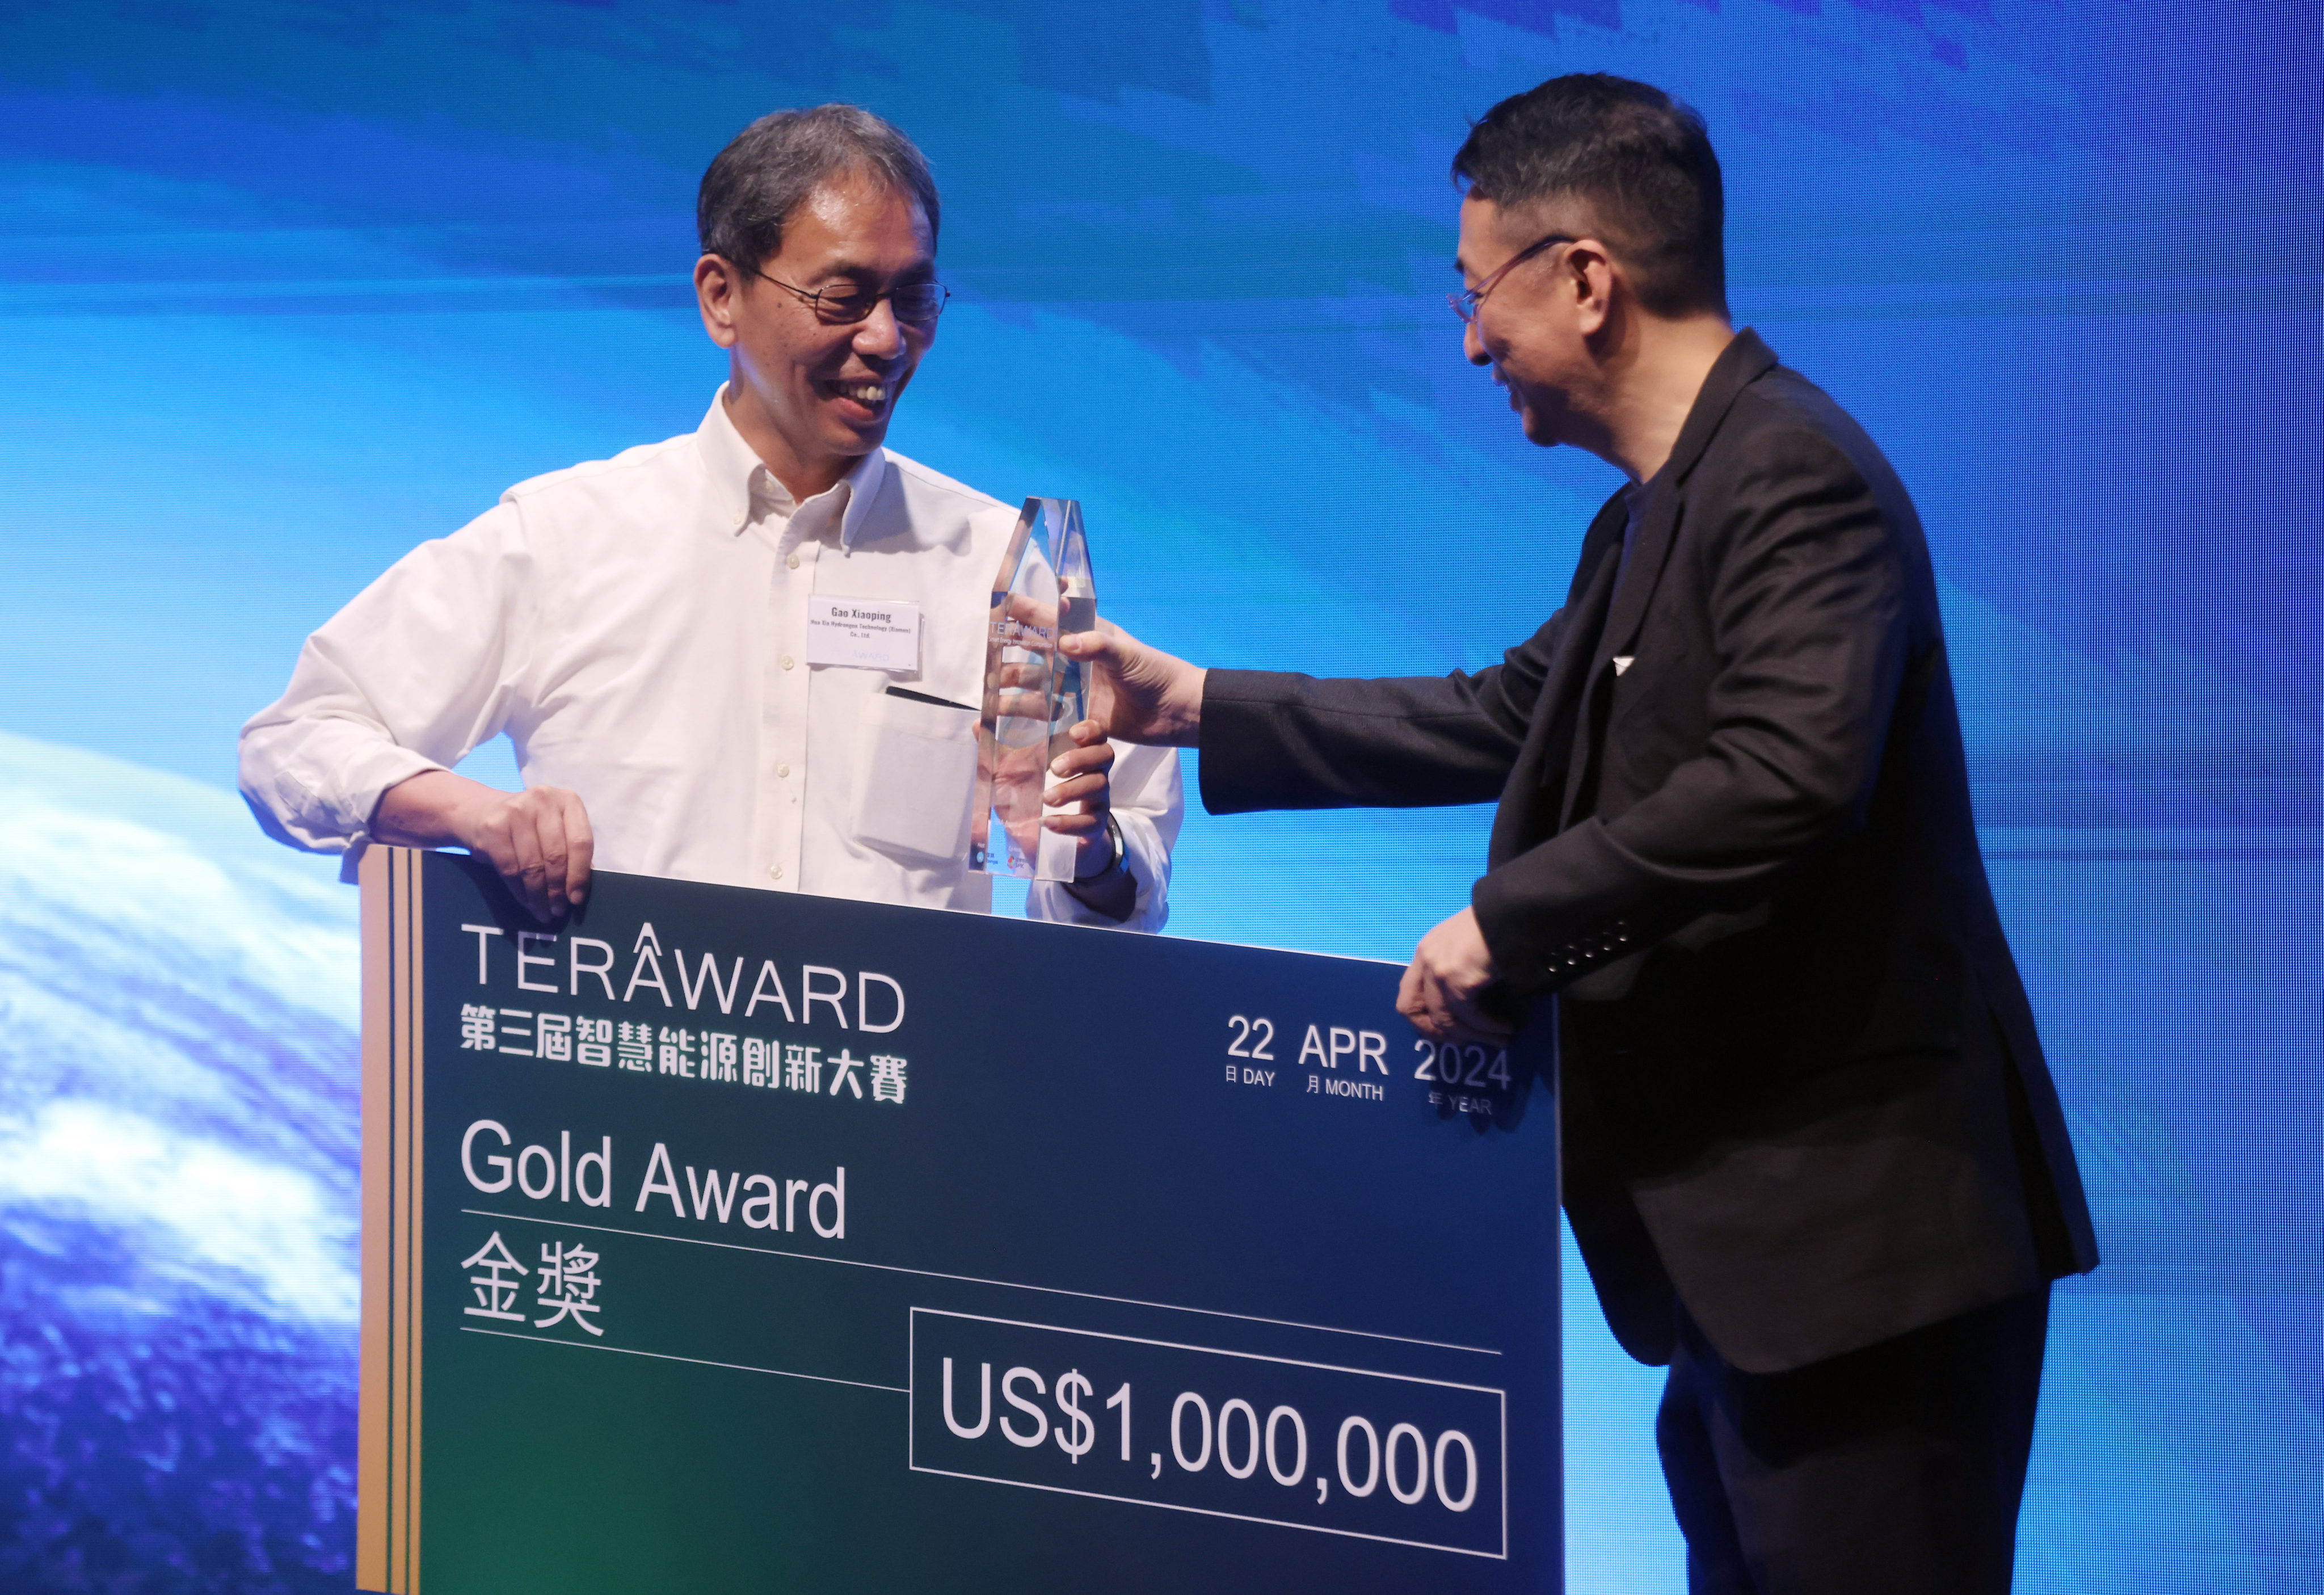 A Chinese research team developing advanced alkaline hydrogen-producing equipment won gold and US$1 million in prize money. Photo: Jonathan Wong